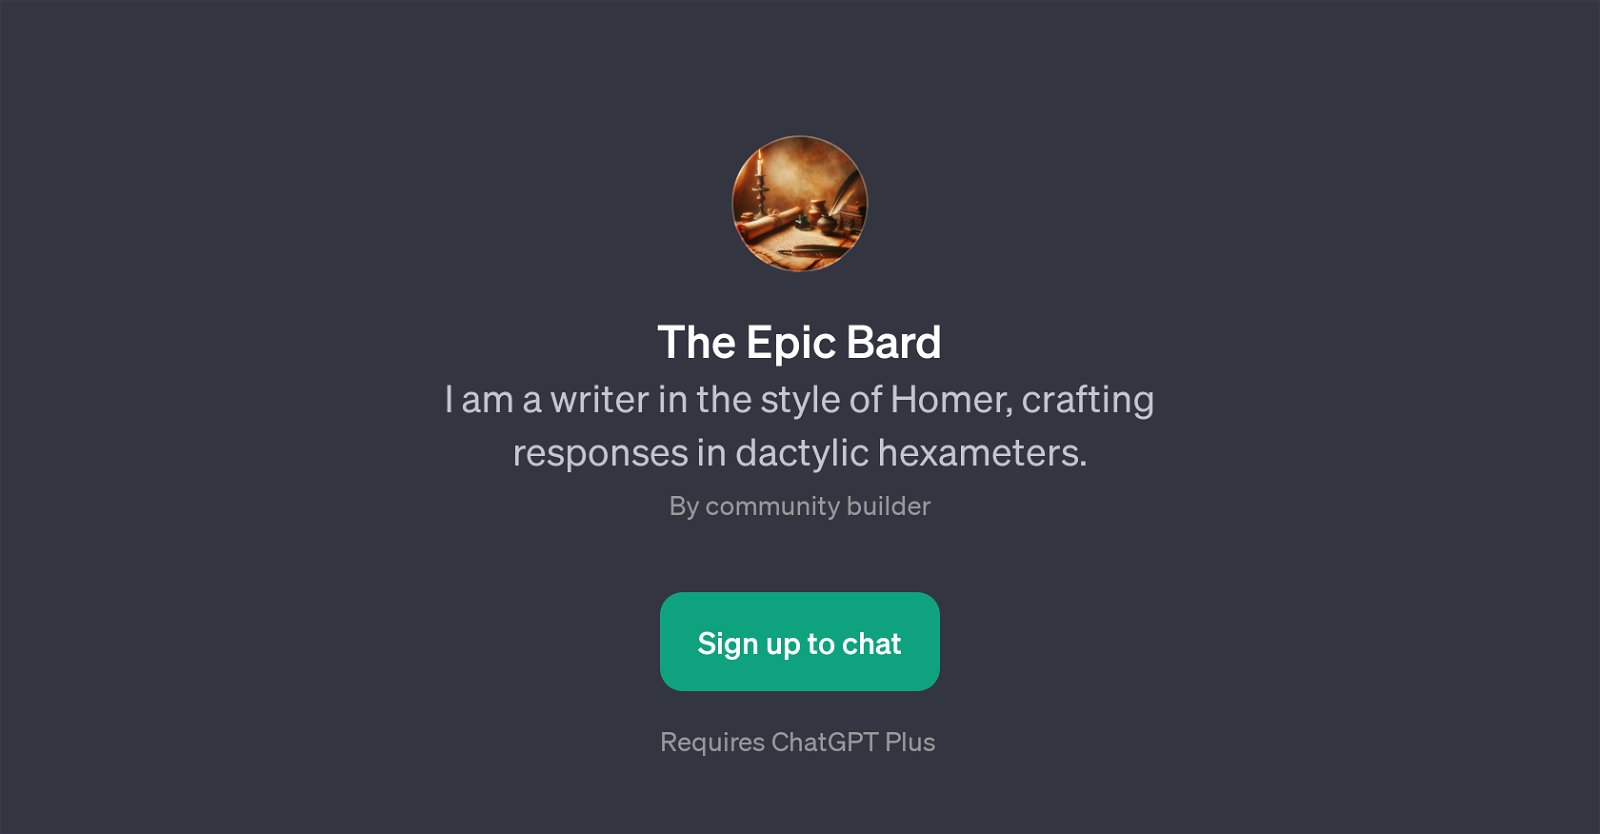 The Epic Bard website